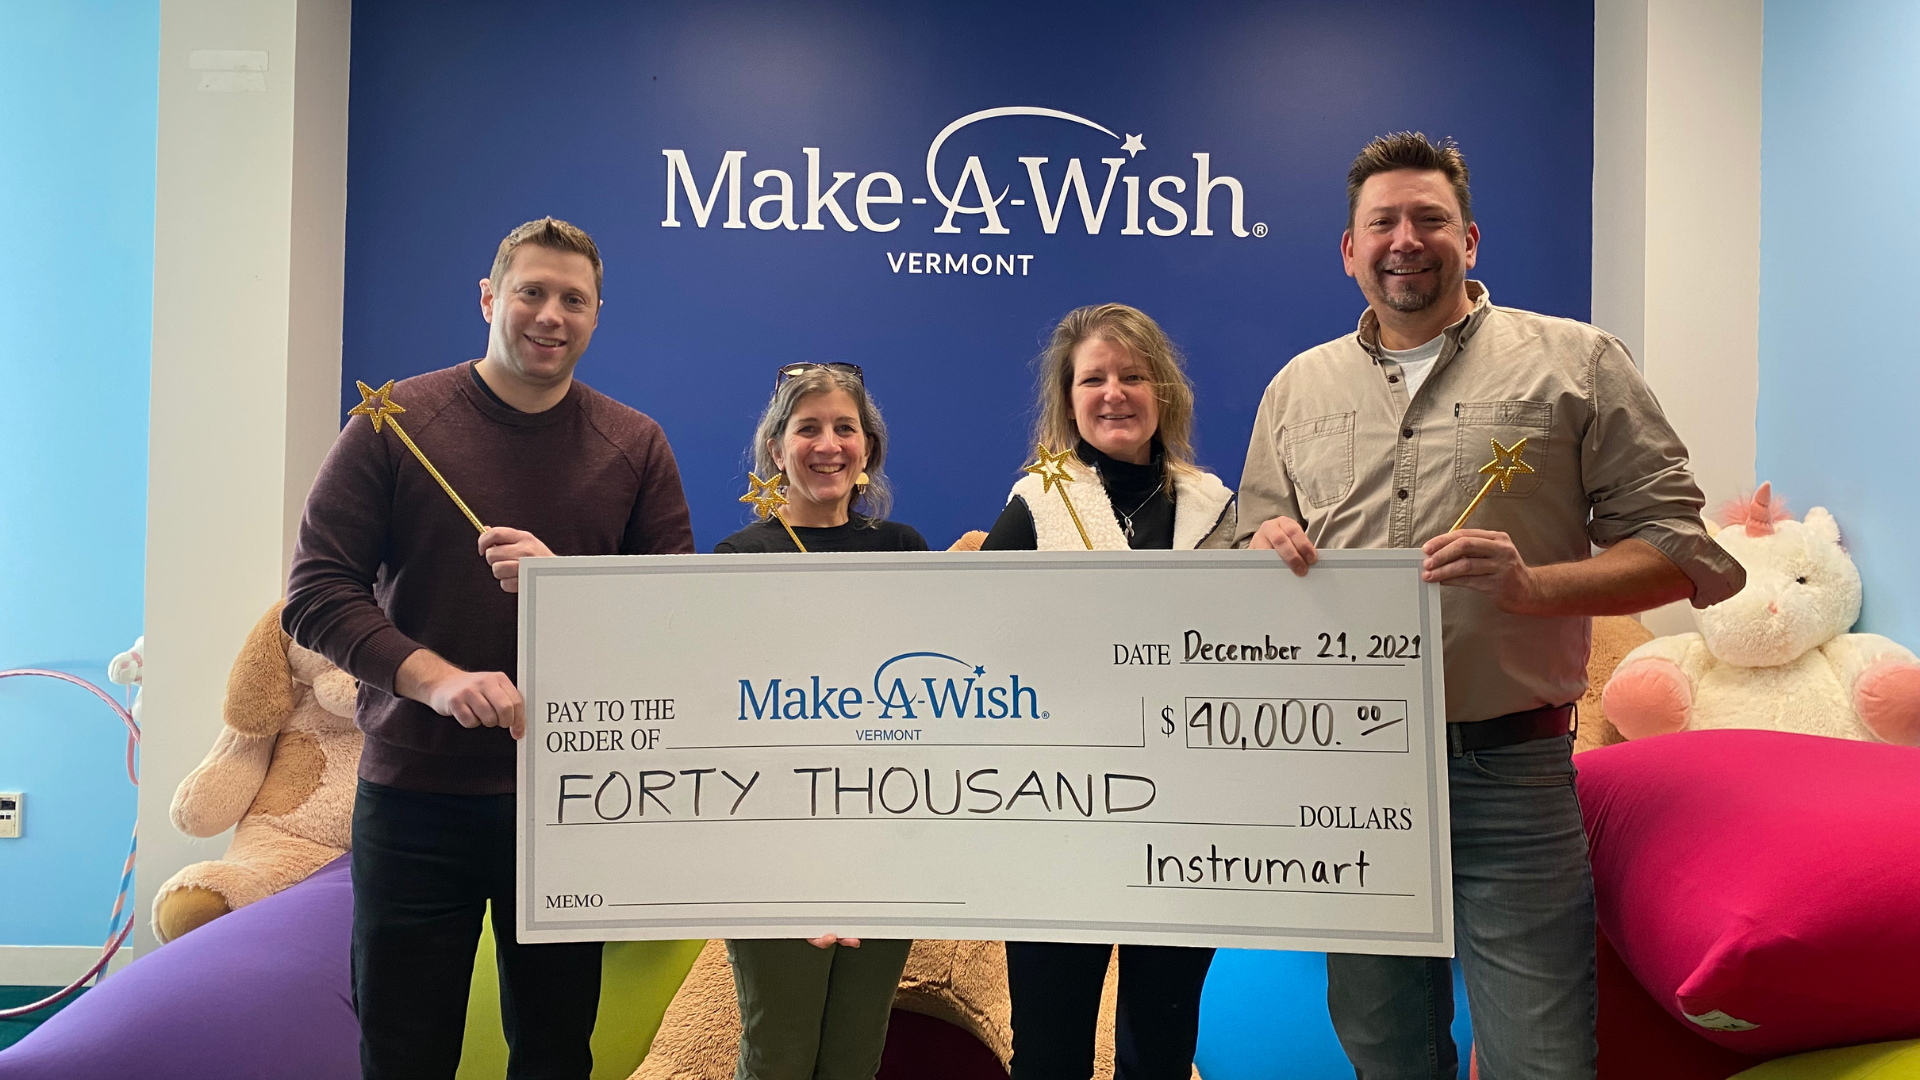 Image of Instrumart employees posing with a check for $40,000 USD that was donated to Make-A-Wish.